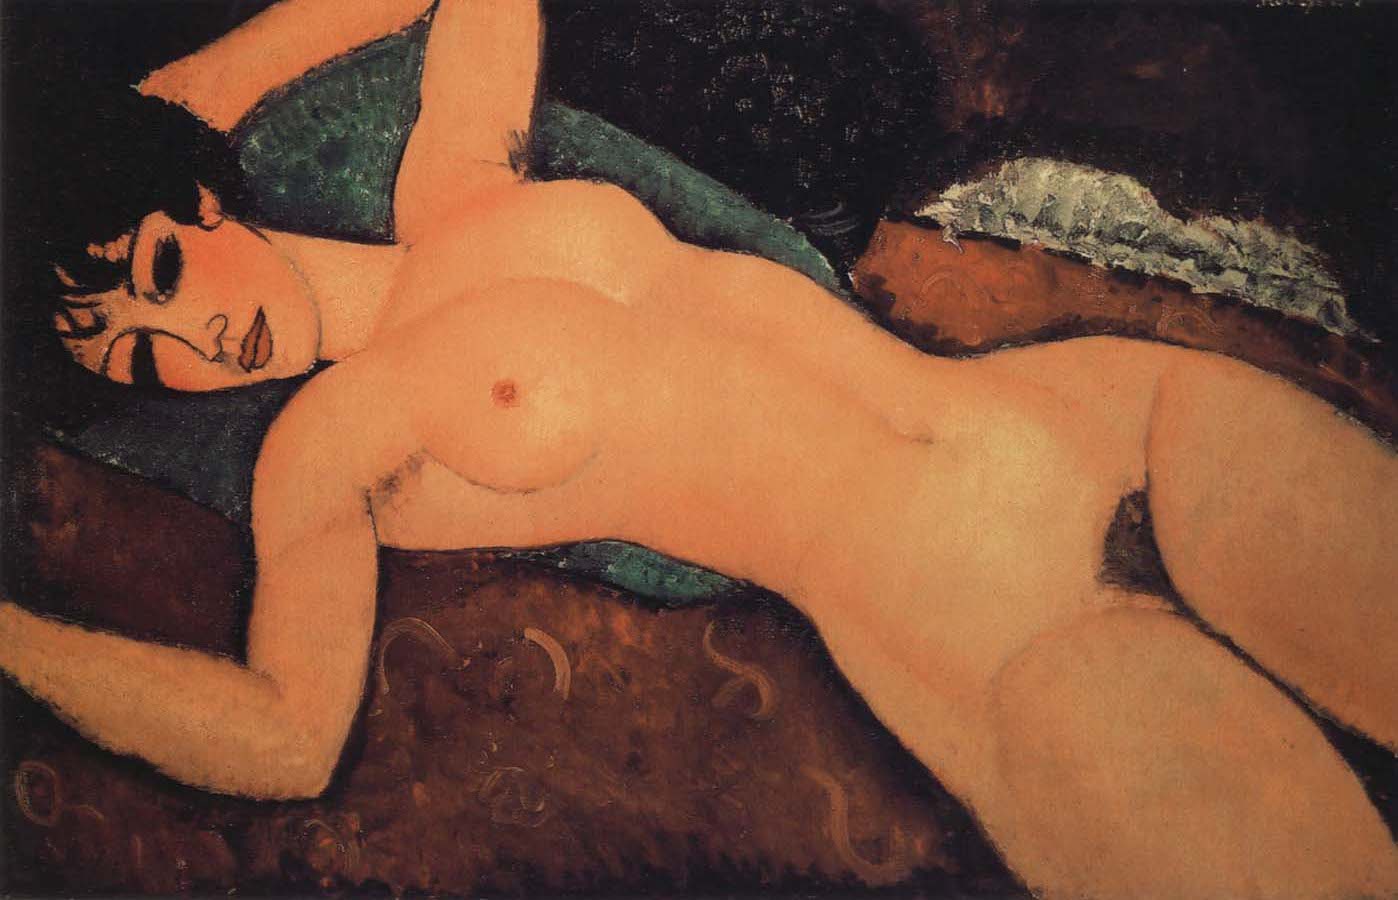 Sleeping nude with arms open